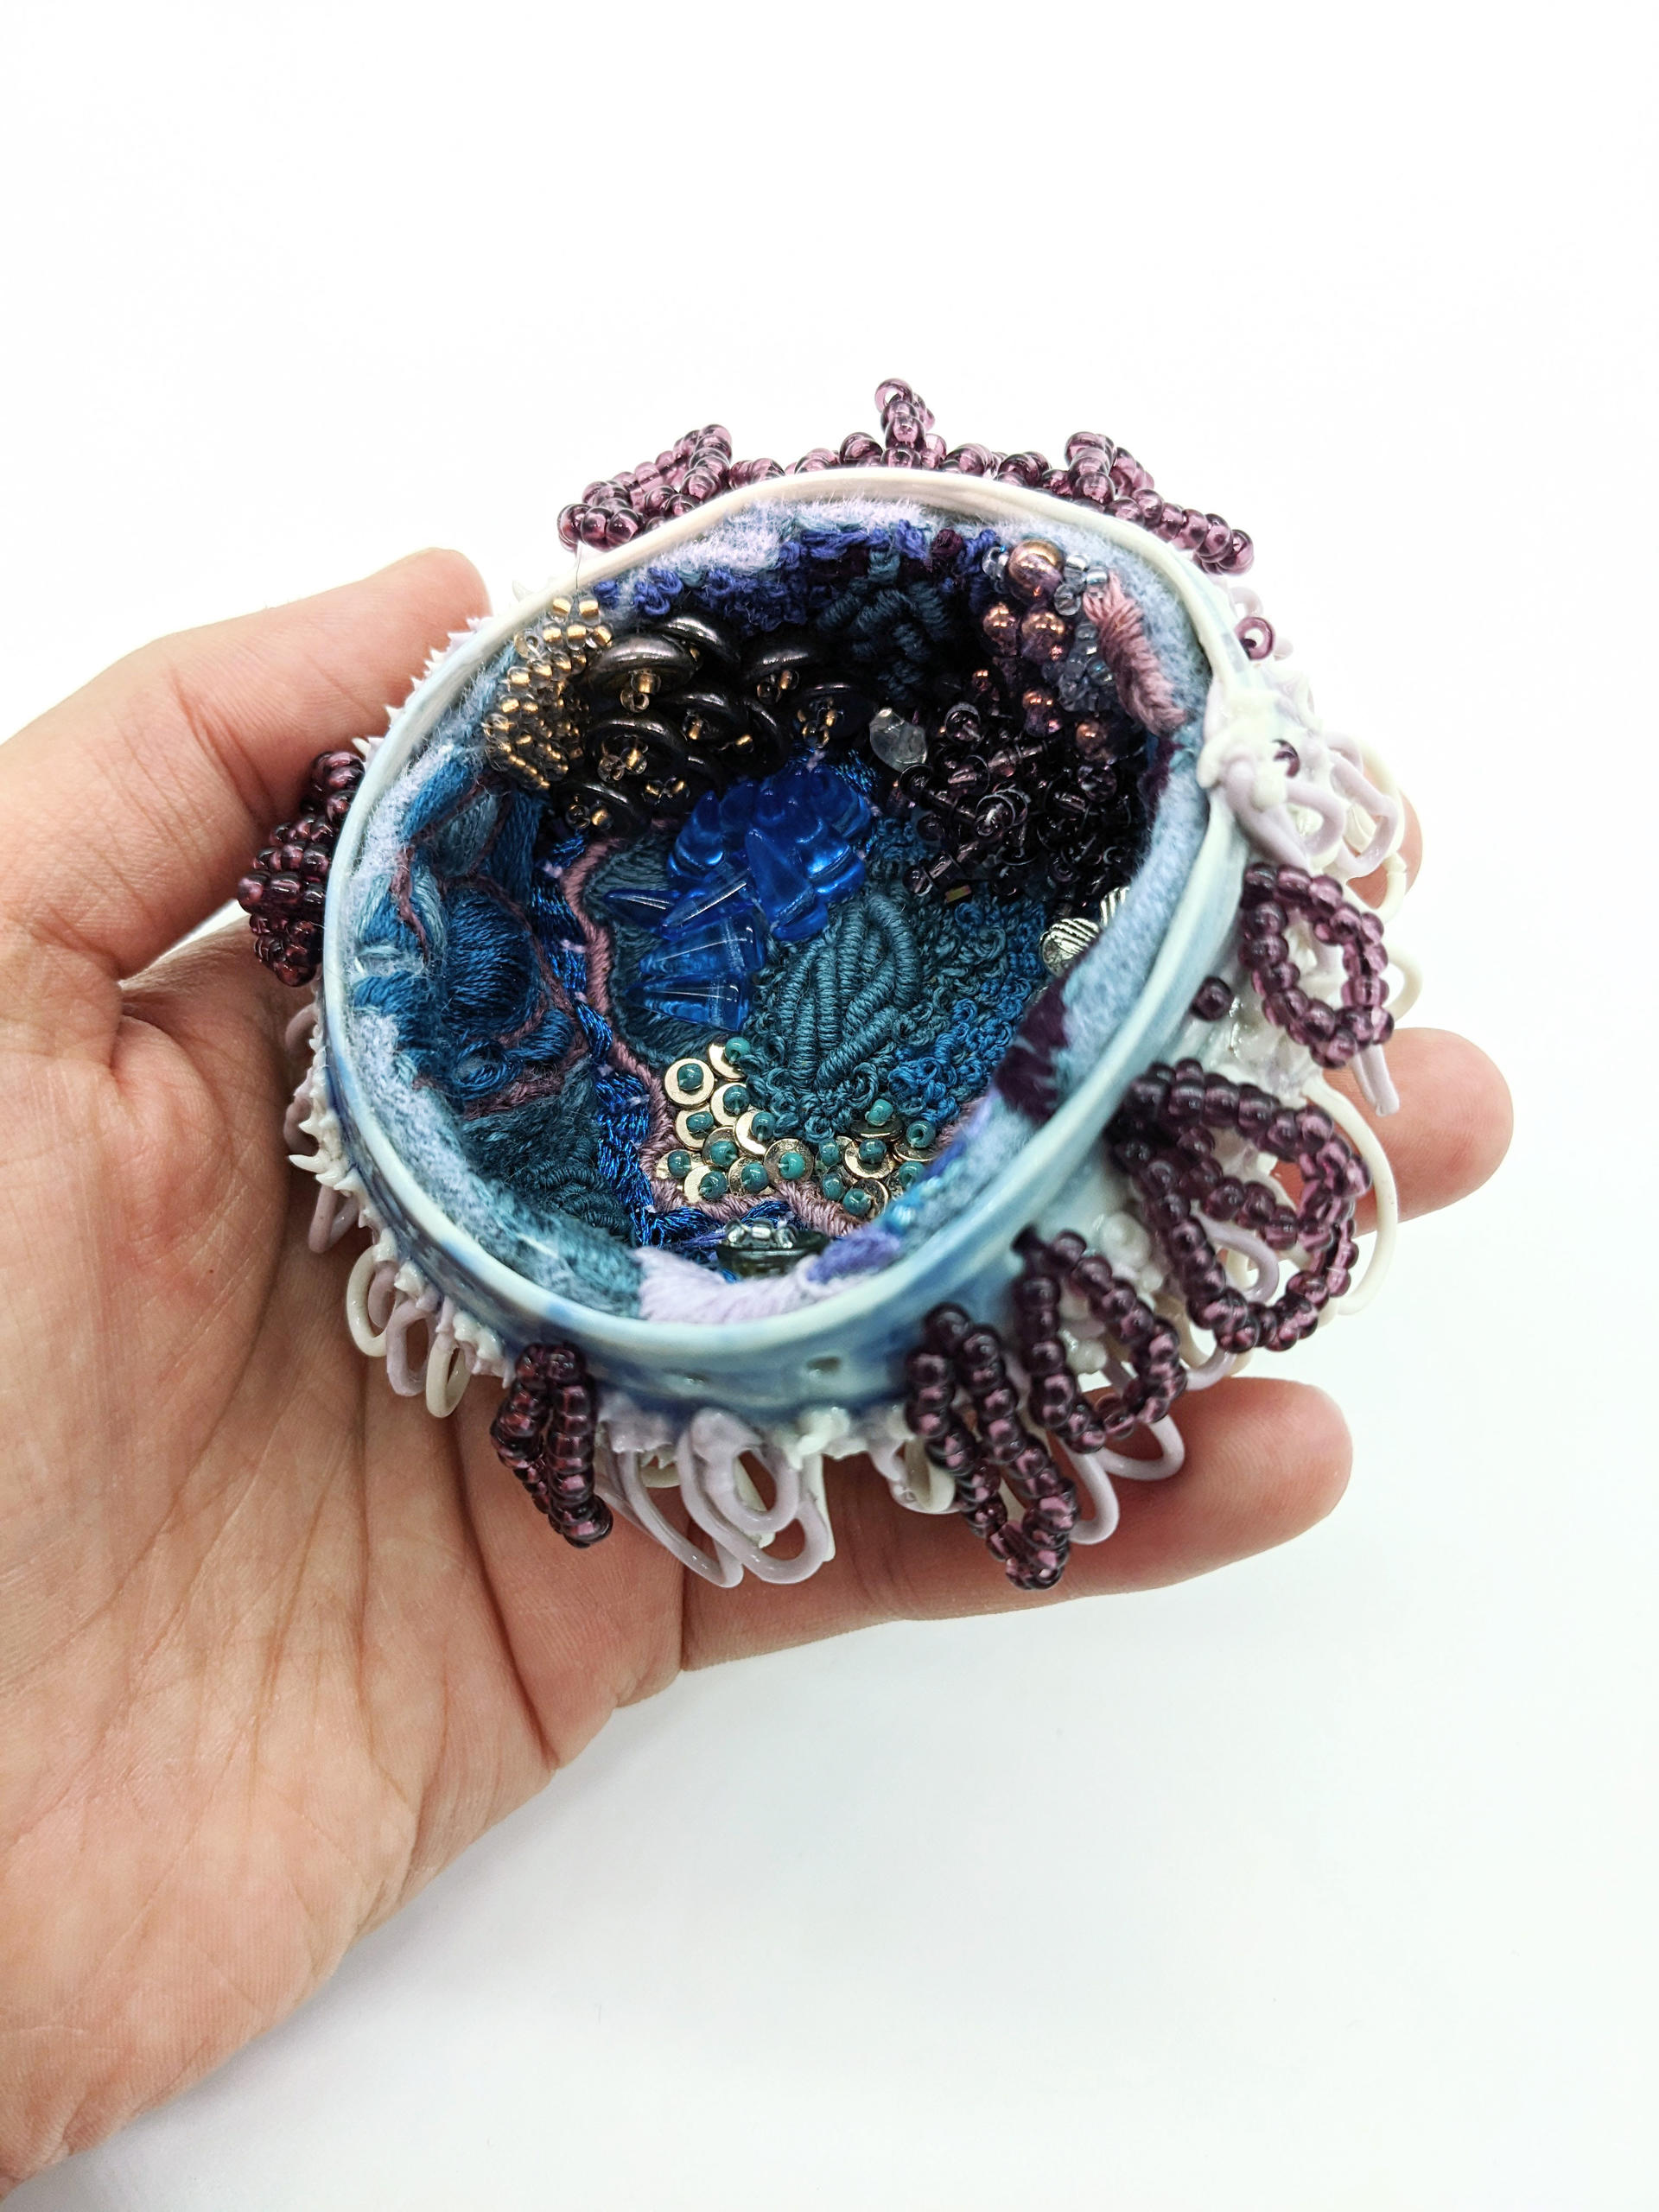 hand holding small porcelain vessel lined with beads and embroidery